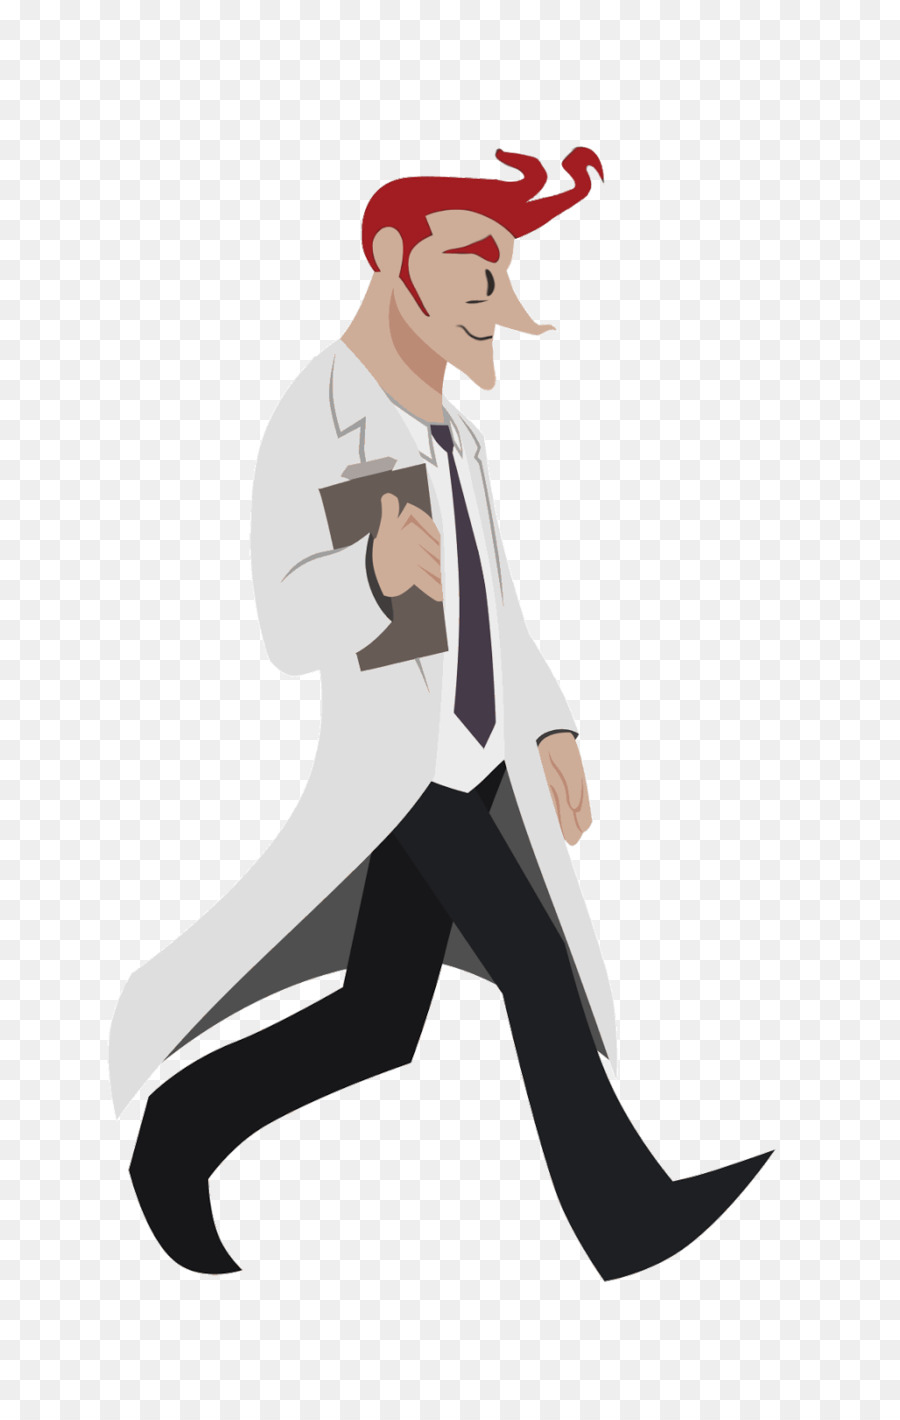 Walk Cycle Animation Scientist Image GIF Animation Png Download